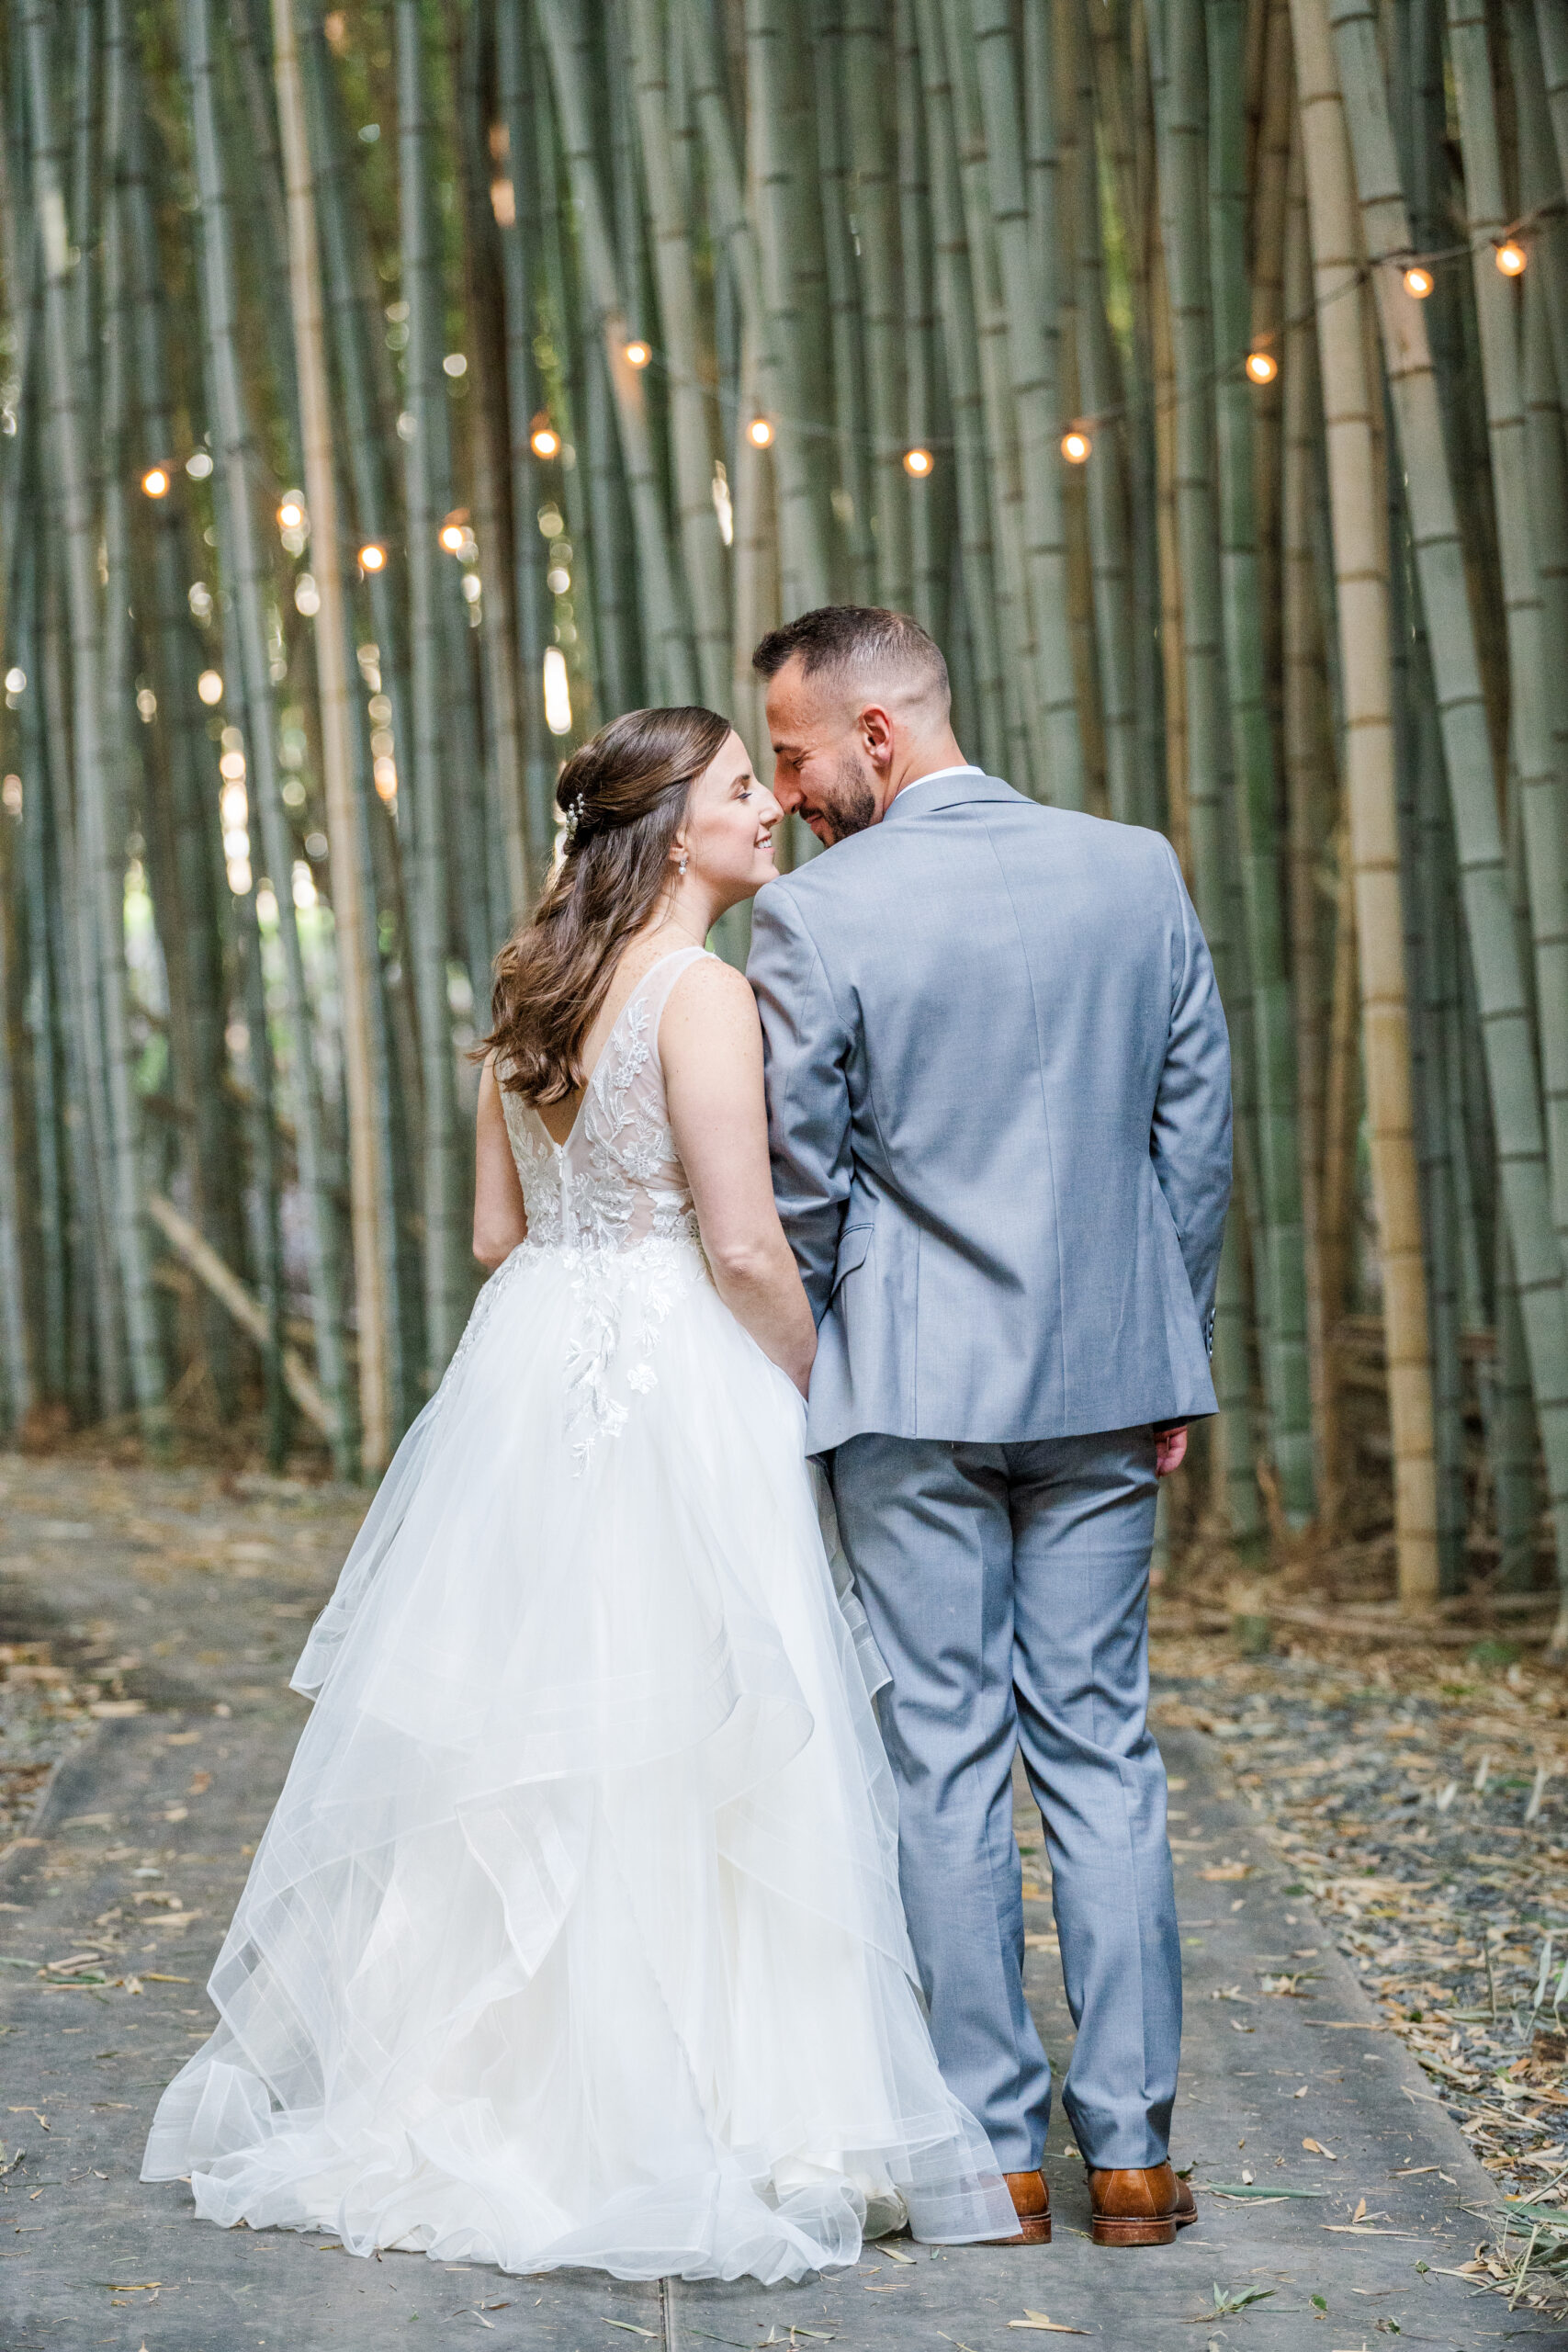 The bride and groom have their backs to the camera. Both their heads are turned in towards each other. Their eyes are closed as they smile and nuzzle in close. Around them is a towering forest of bamboo littered with dancing fairy lights.